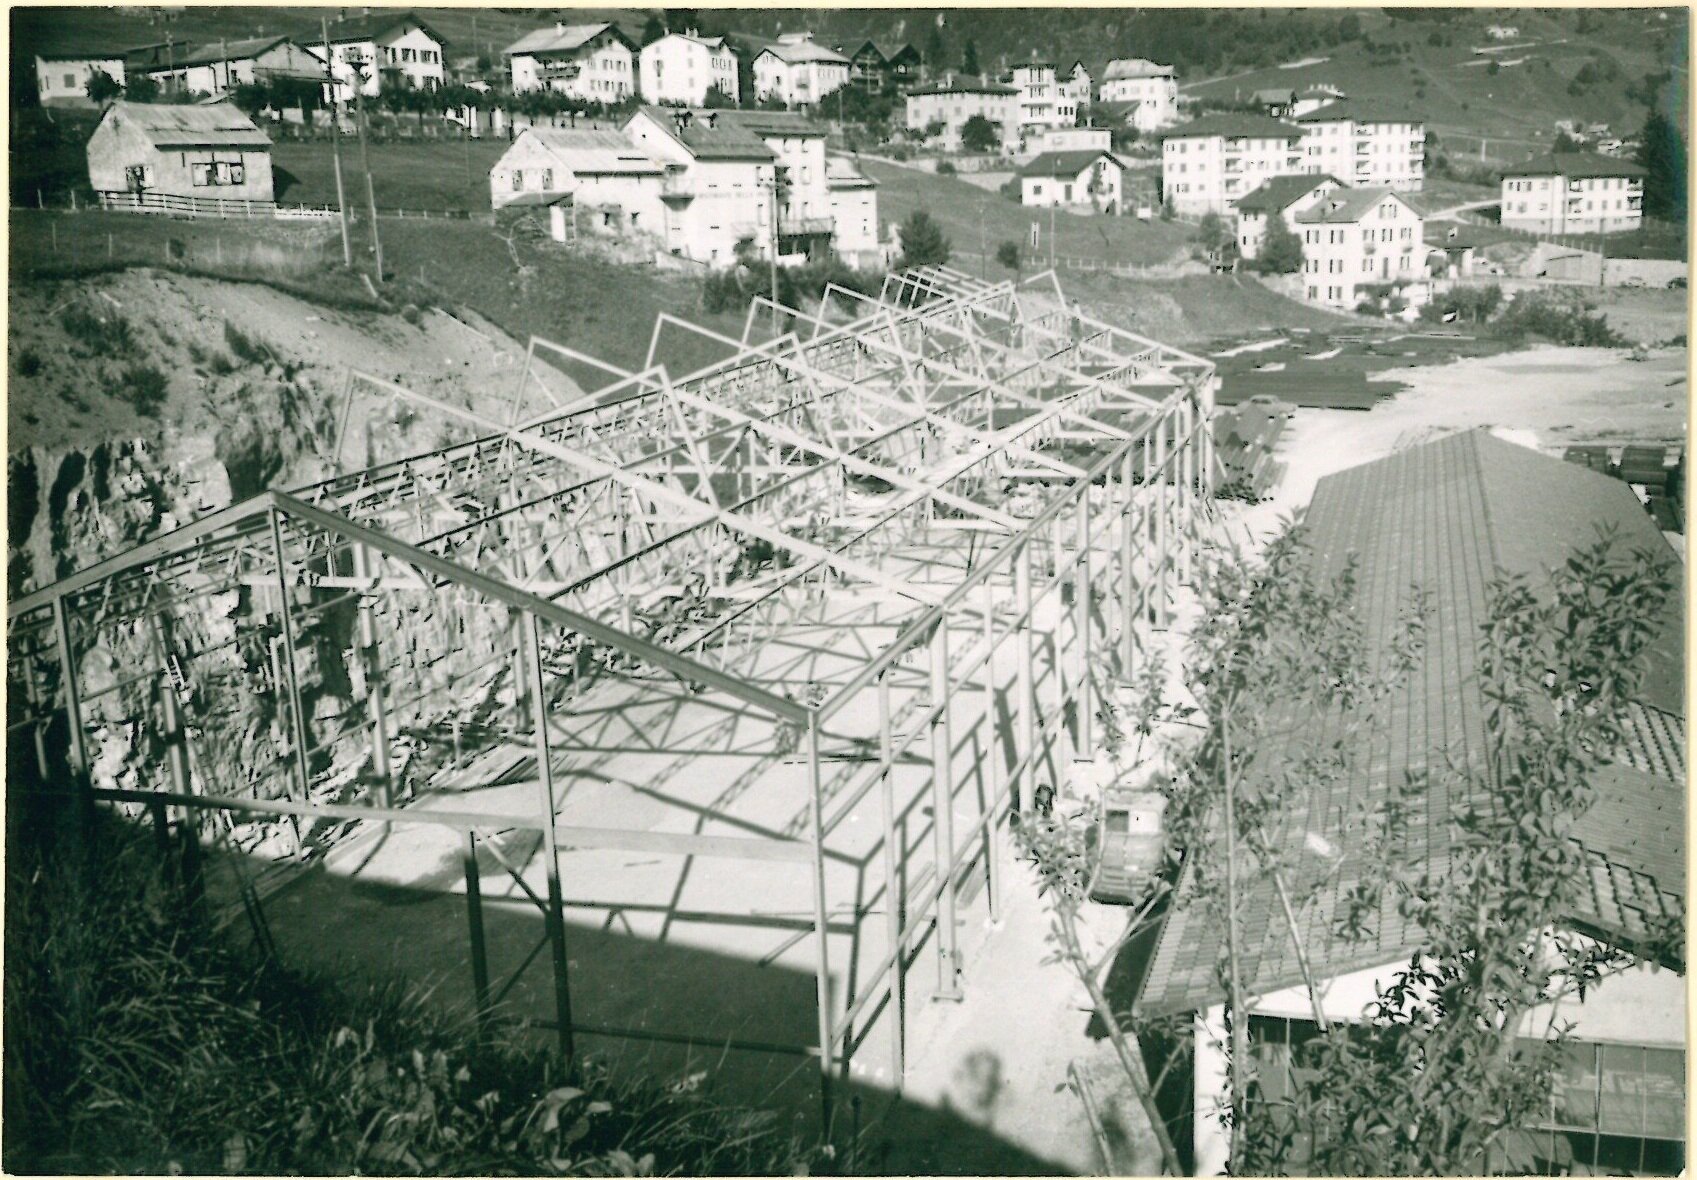 Construction of the new production facilities in Airolo in the 1950s.